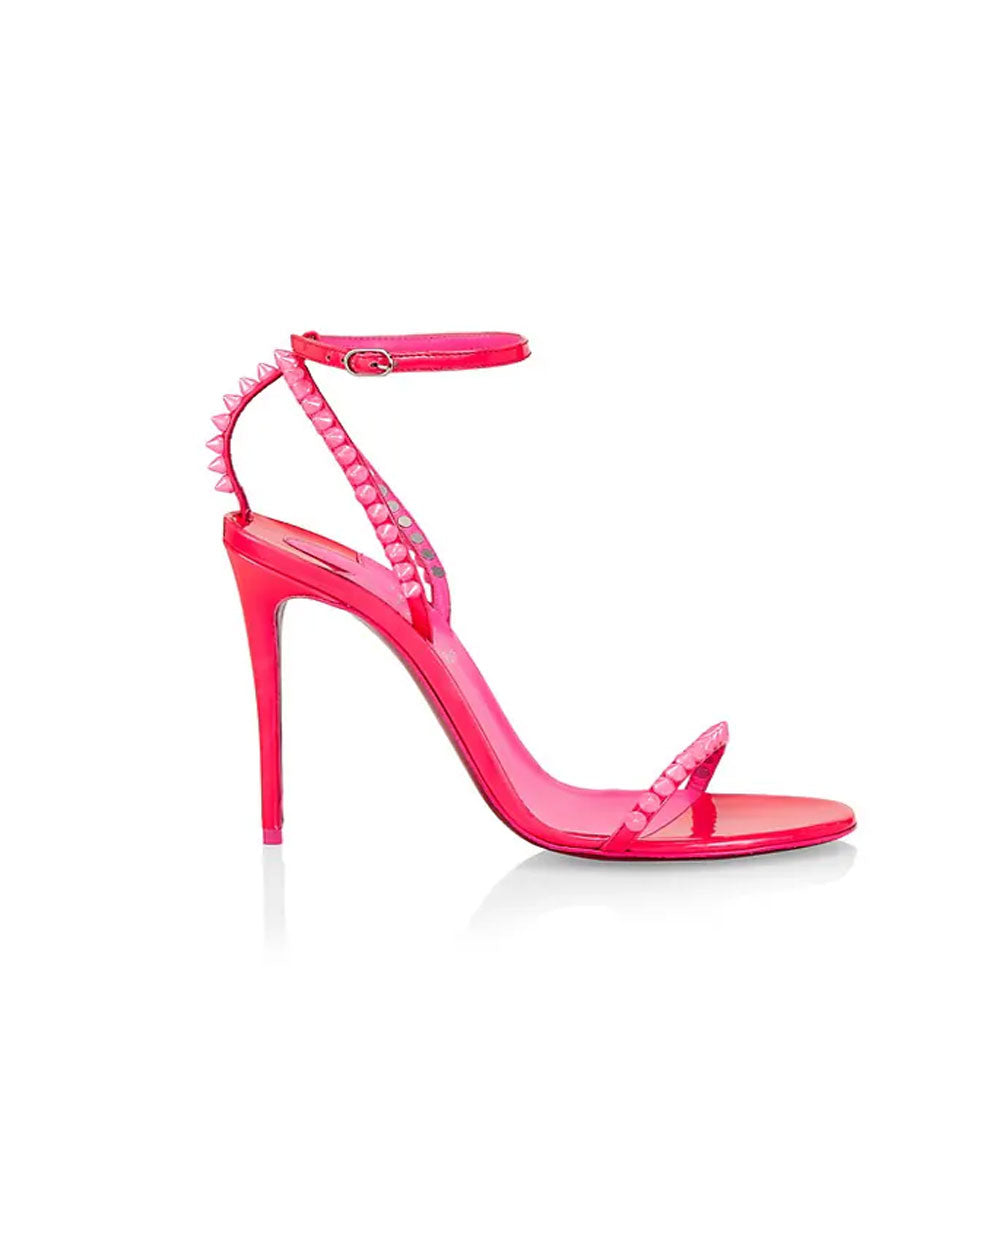 So Me 100 Patent Sandal in Pink